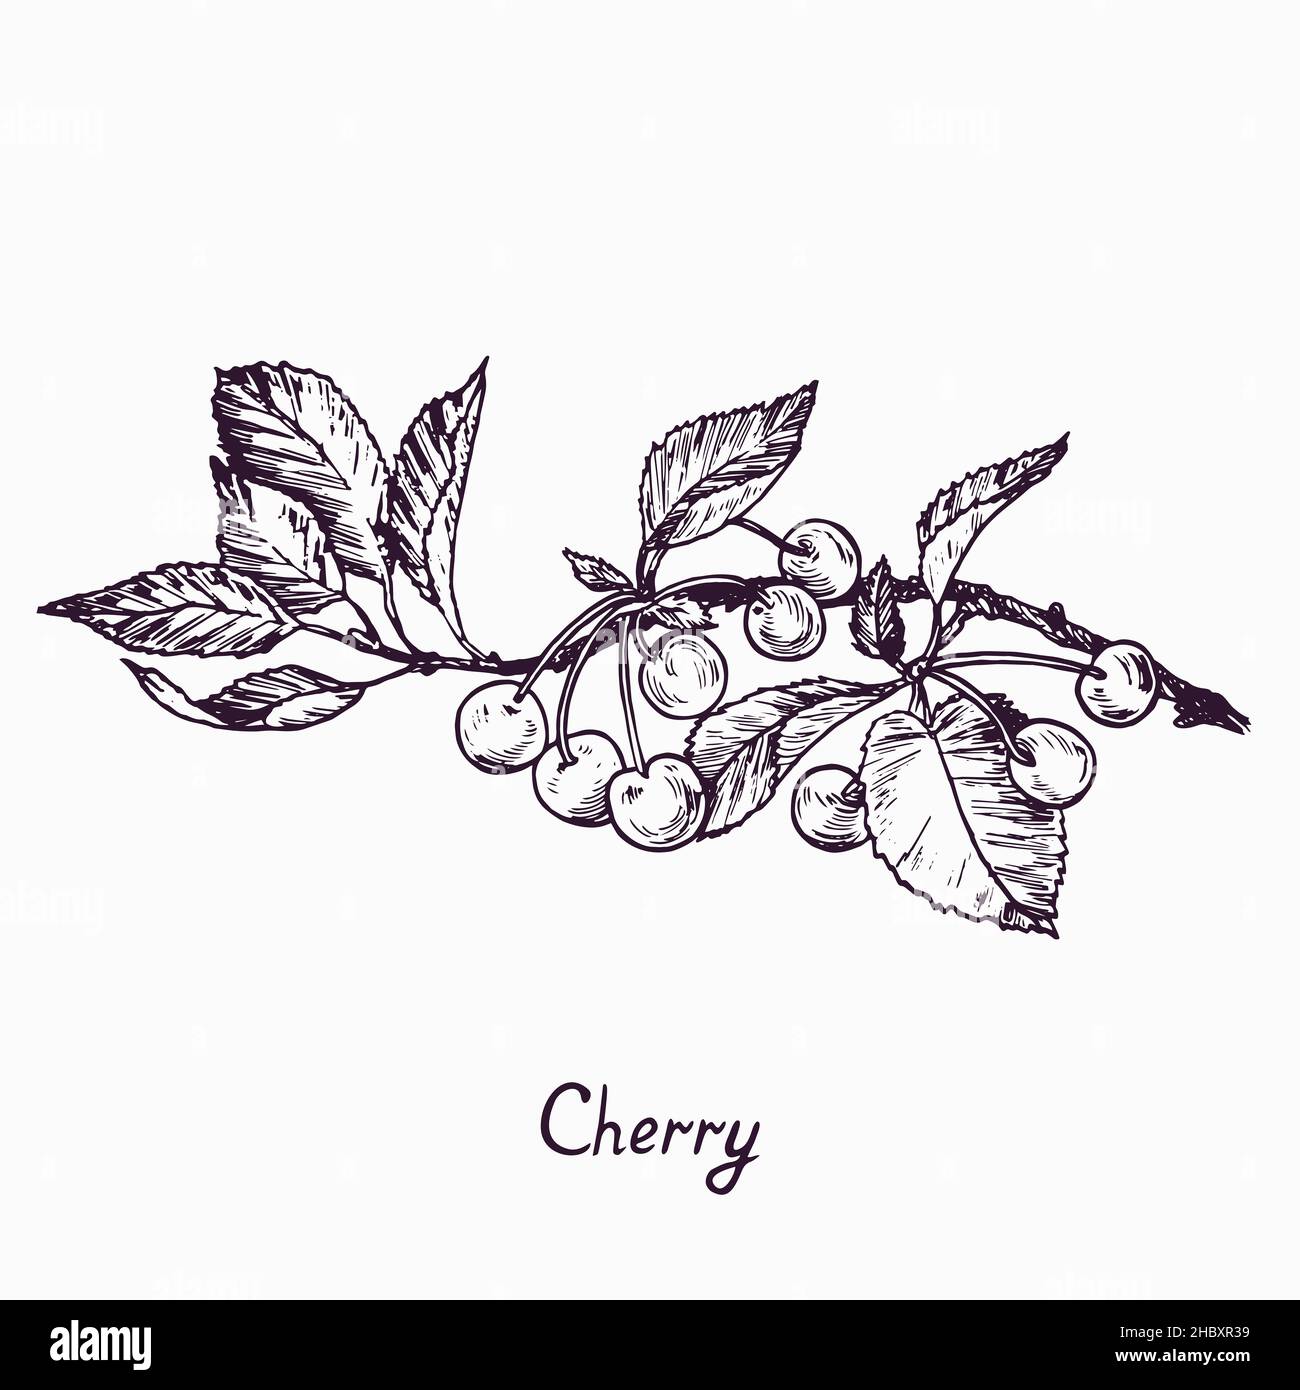 Cherry branch with fruits and leaves, simple doodle drawing with inscription, gravure style Stock Photo